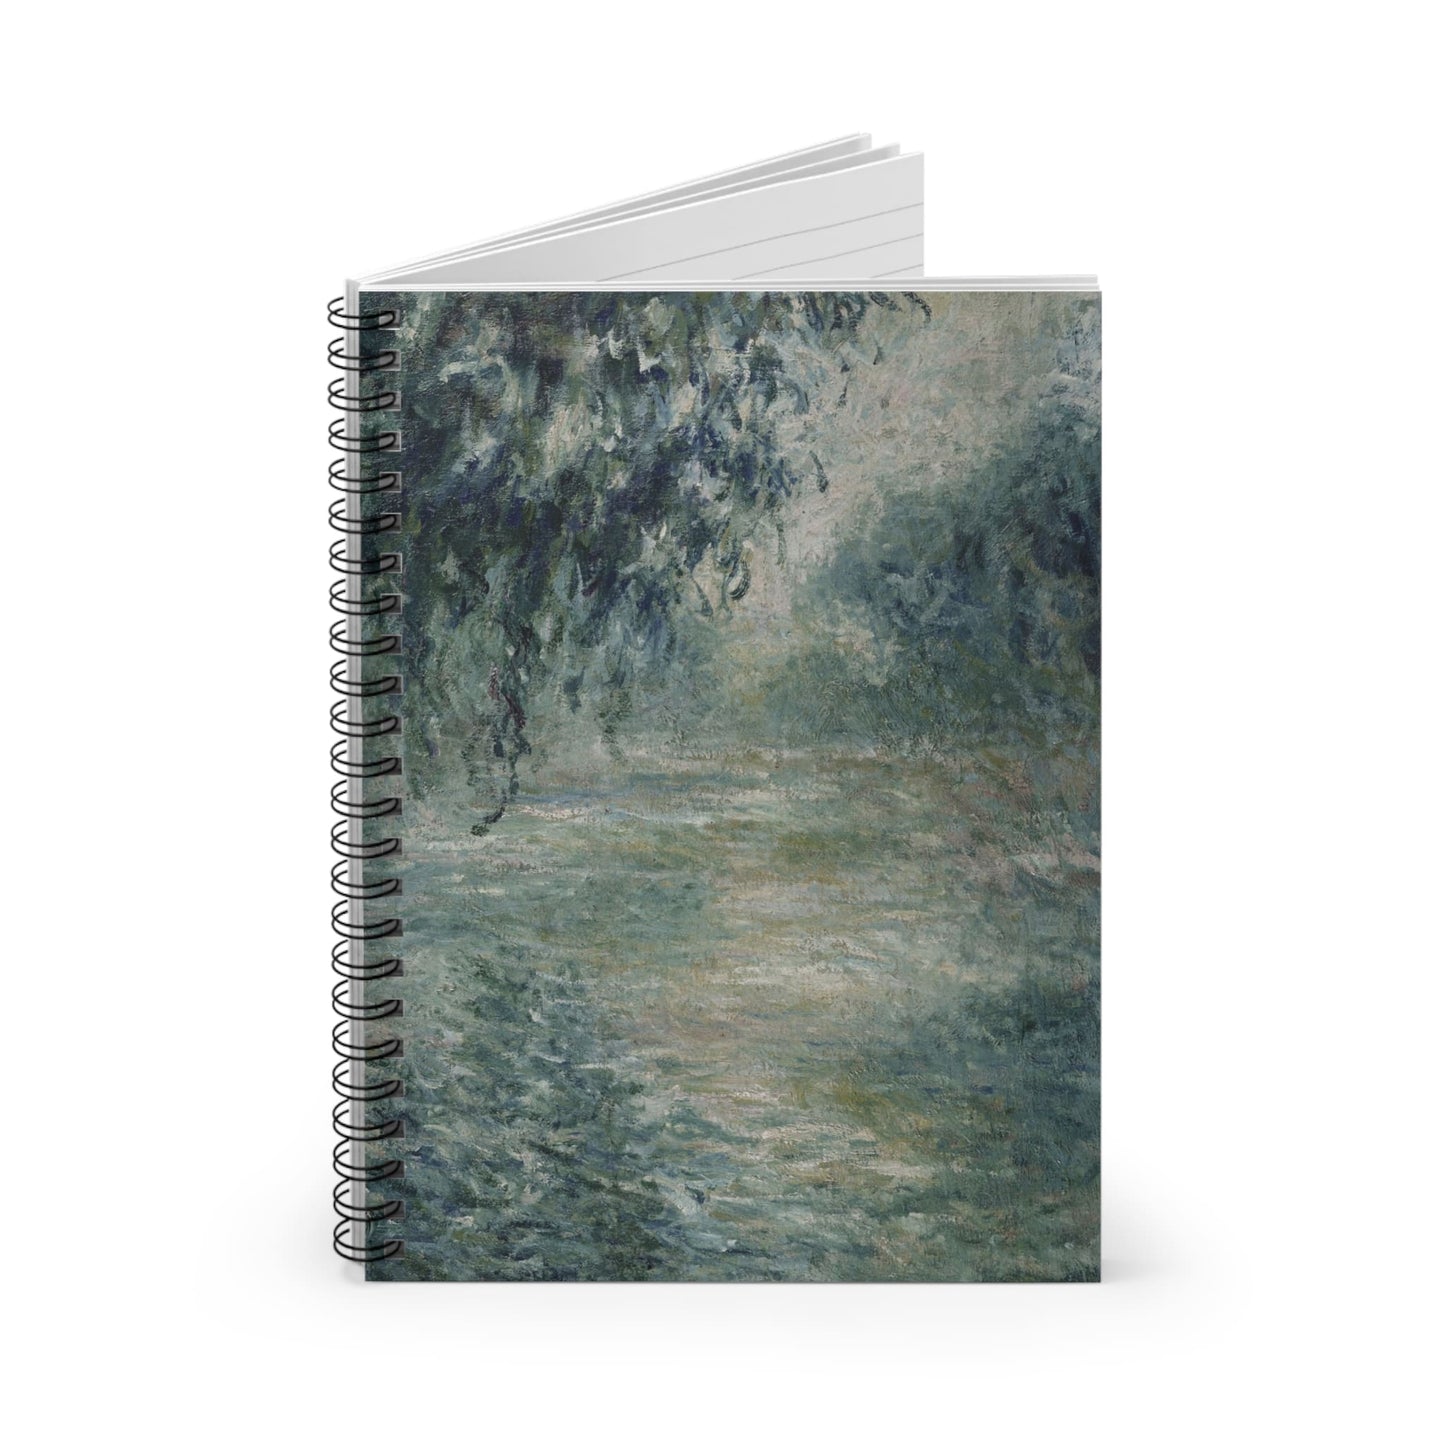 Peaceful Green Spiral Notebook Standing up on White Desk